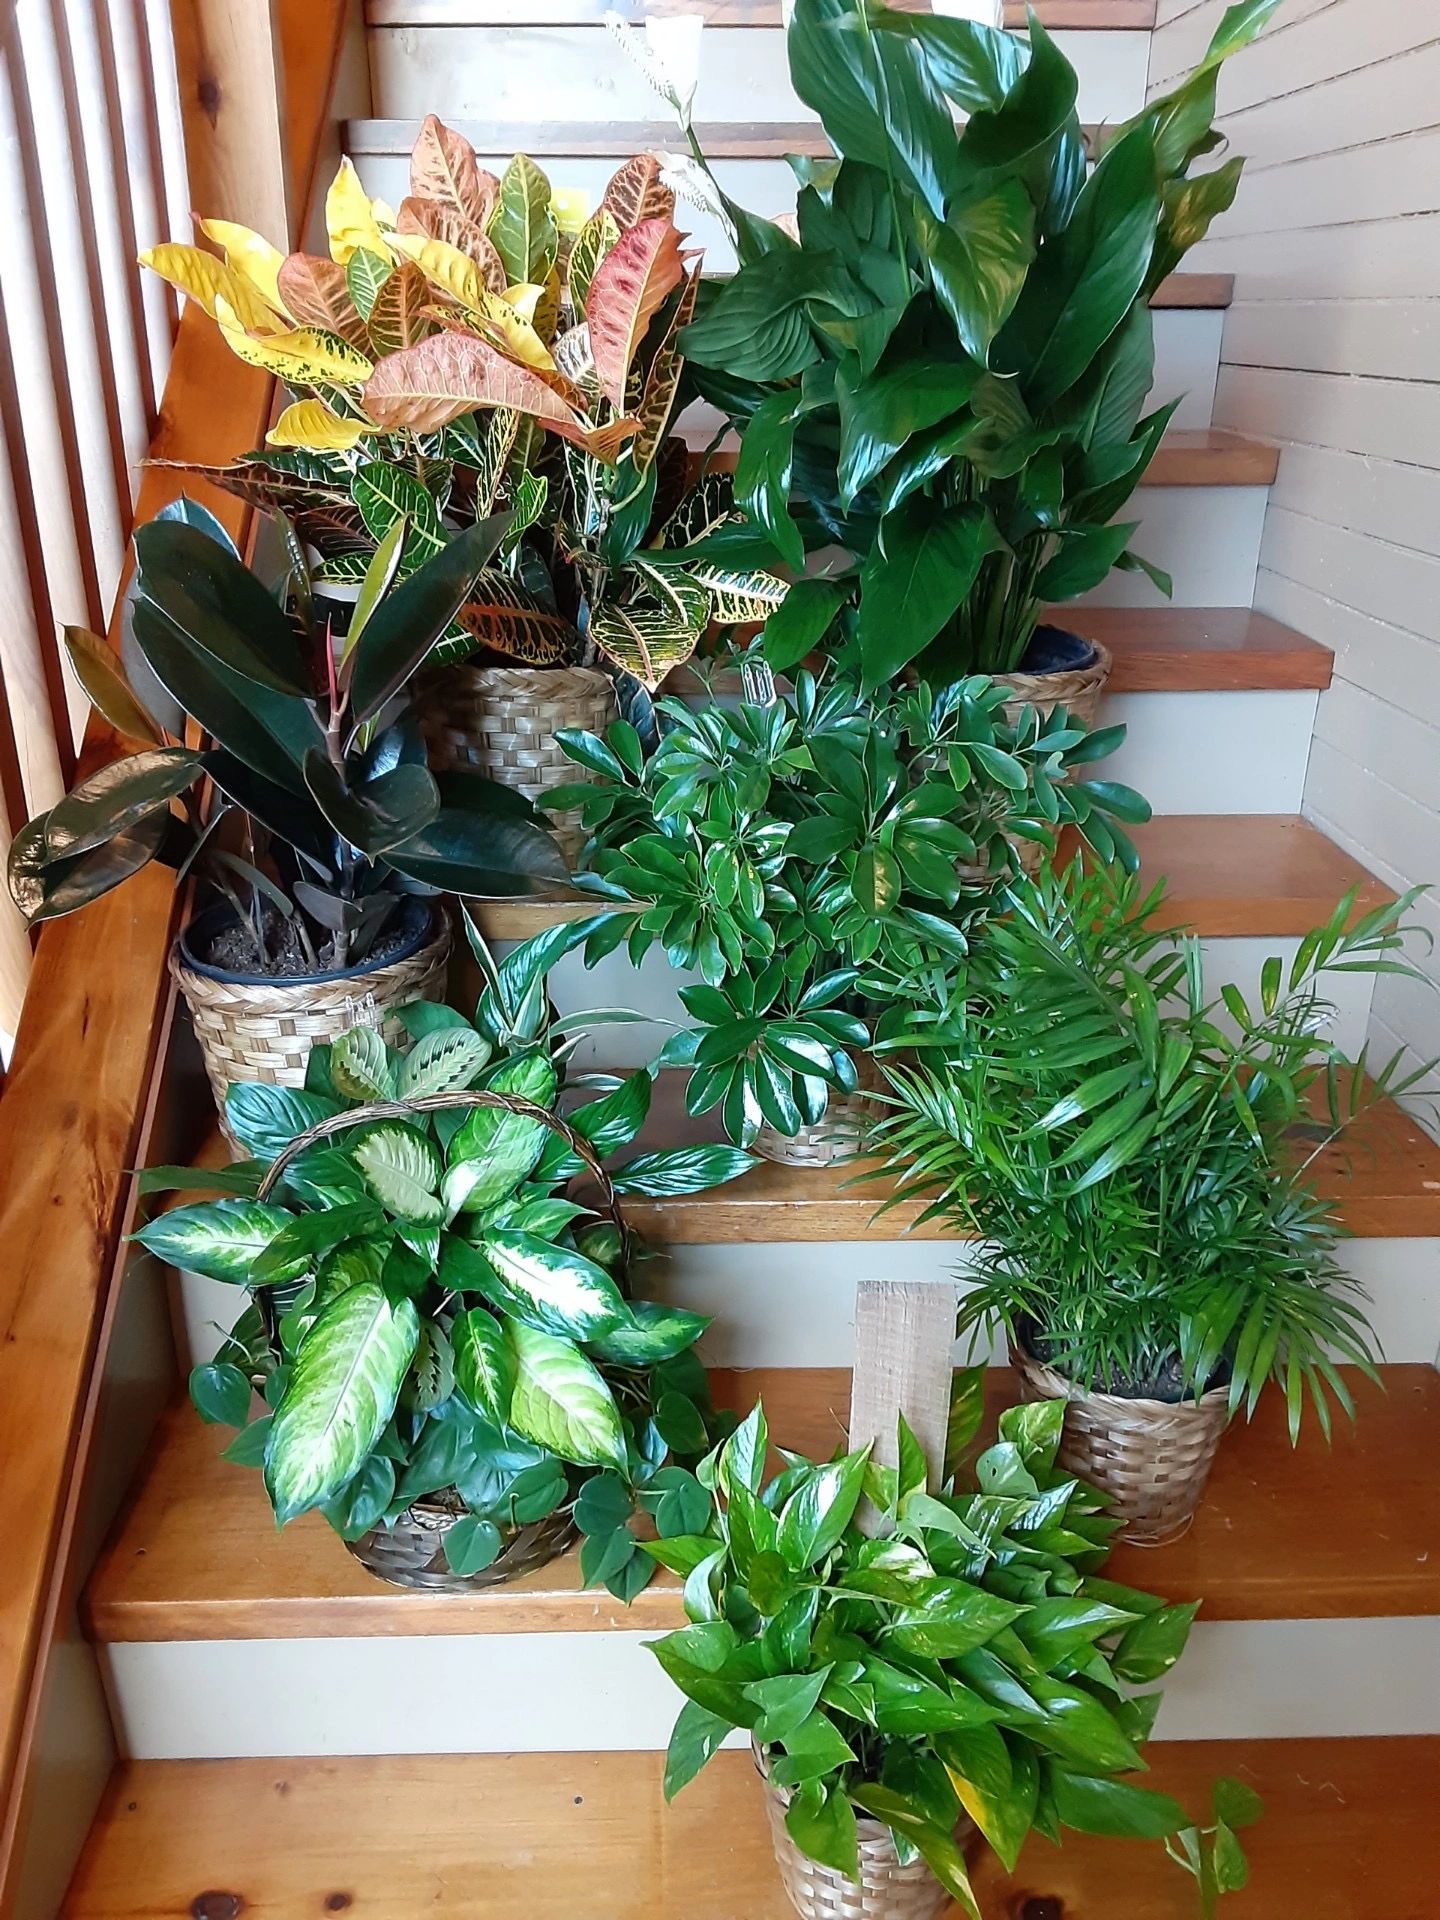 Variety of green plants.  